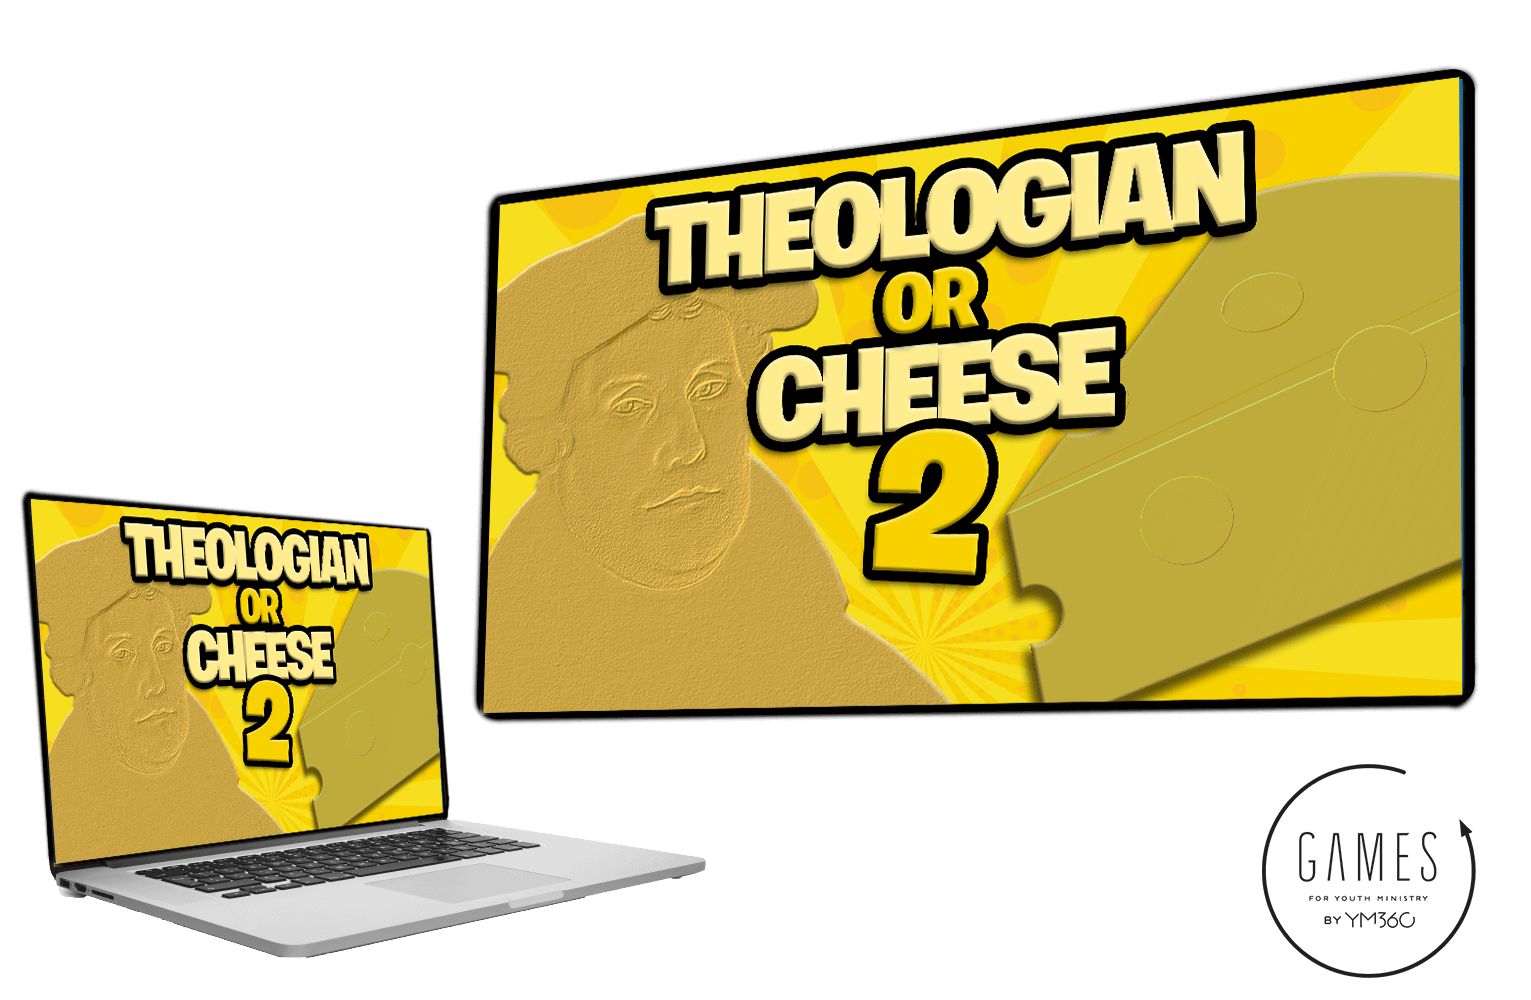 Theologian or Cheese 2